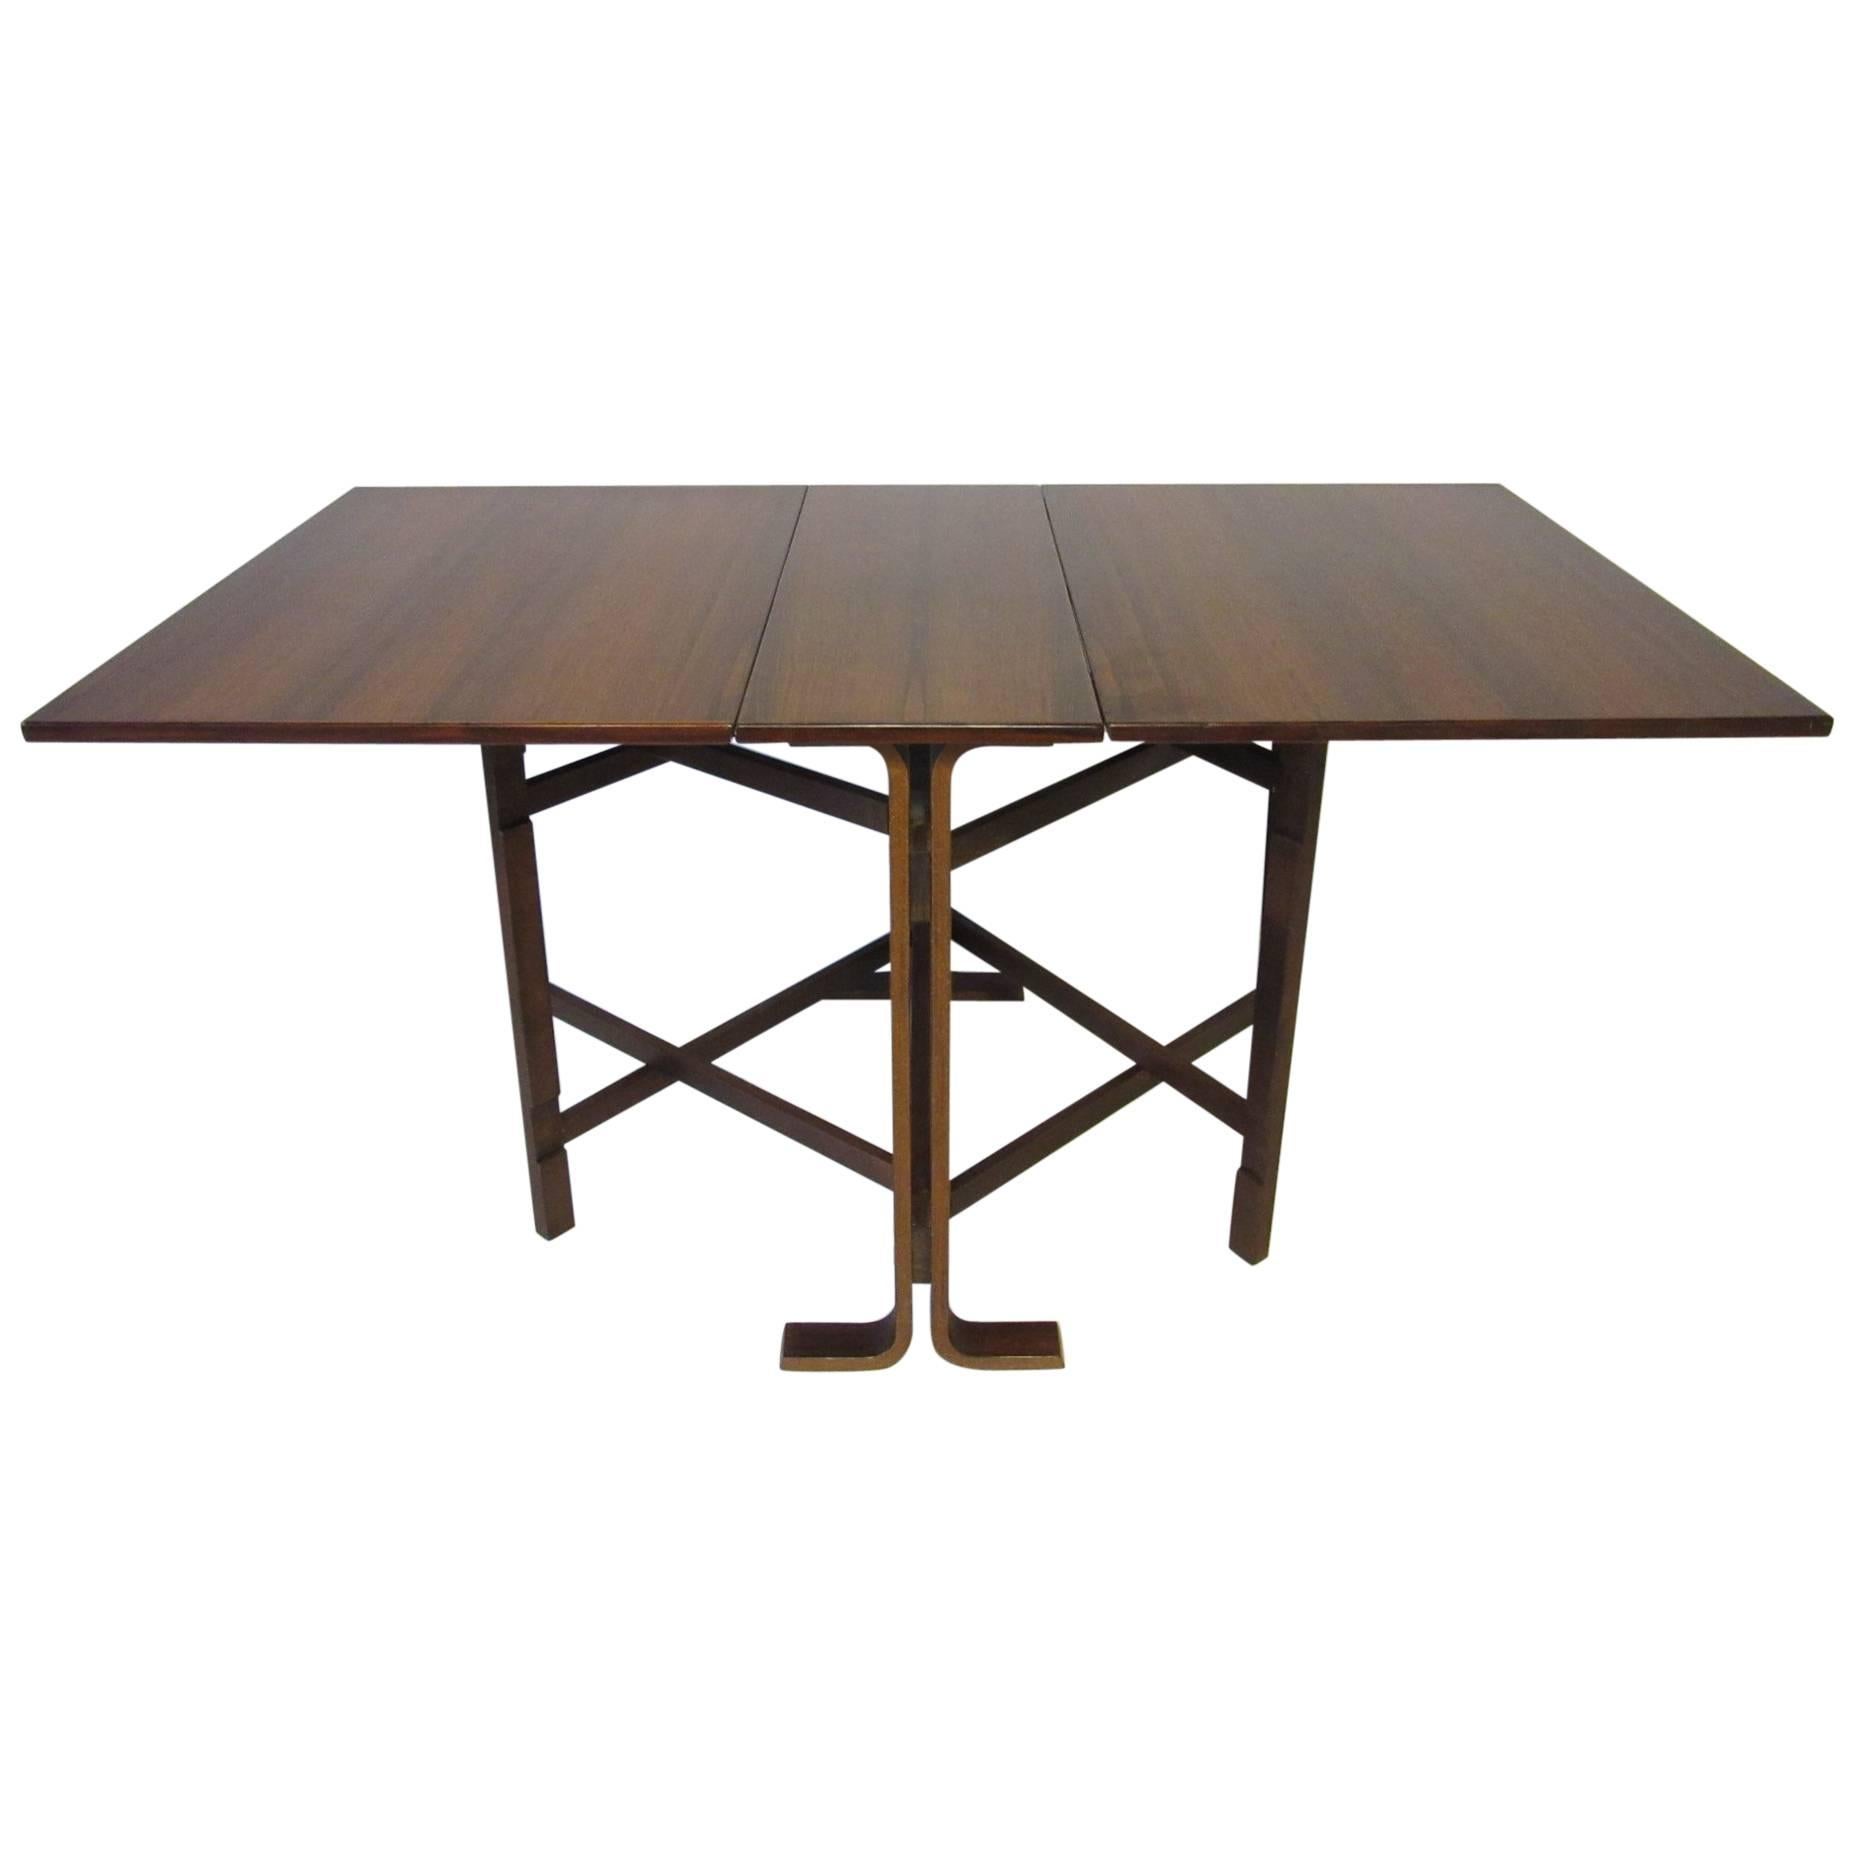 Rose Wood Gate Leg Dining Table in the Style of Danish Modern